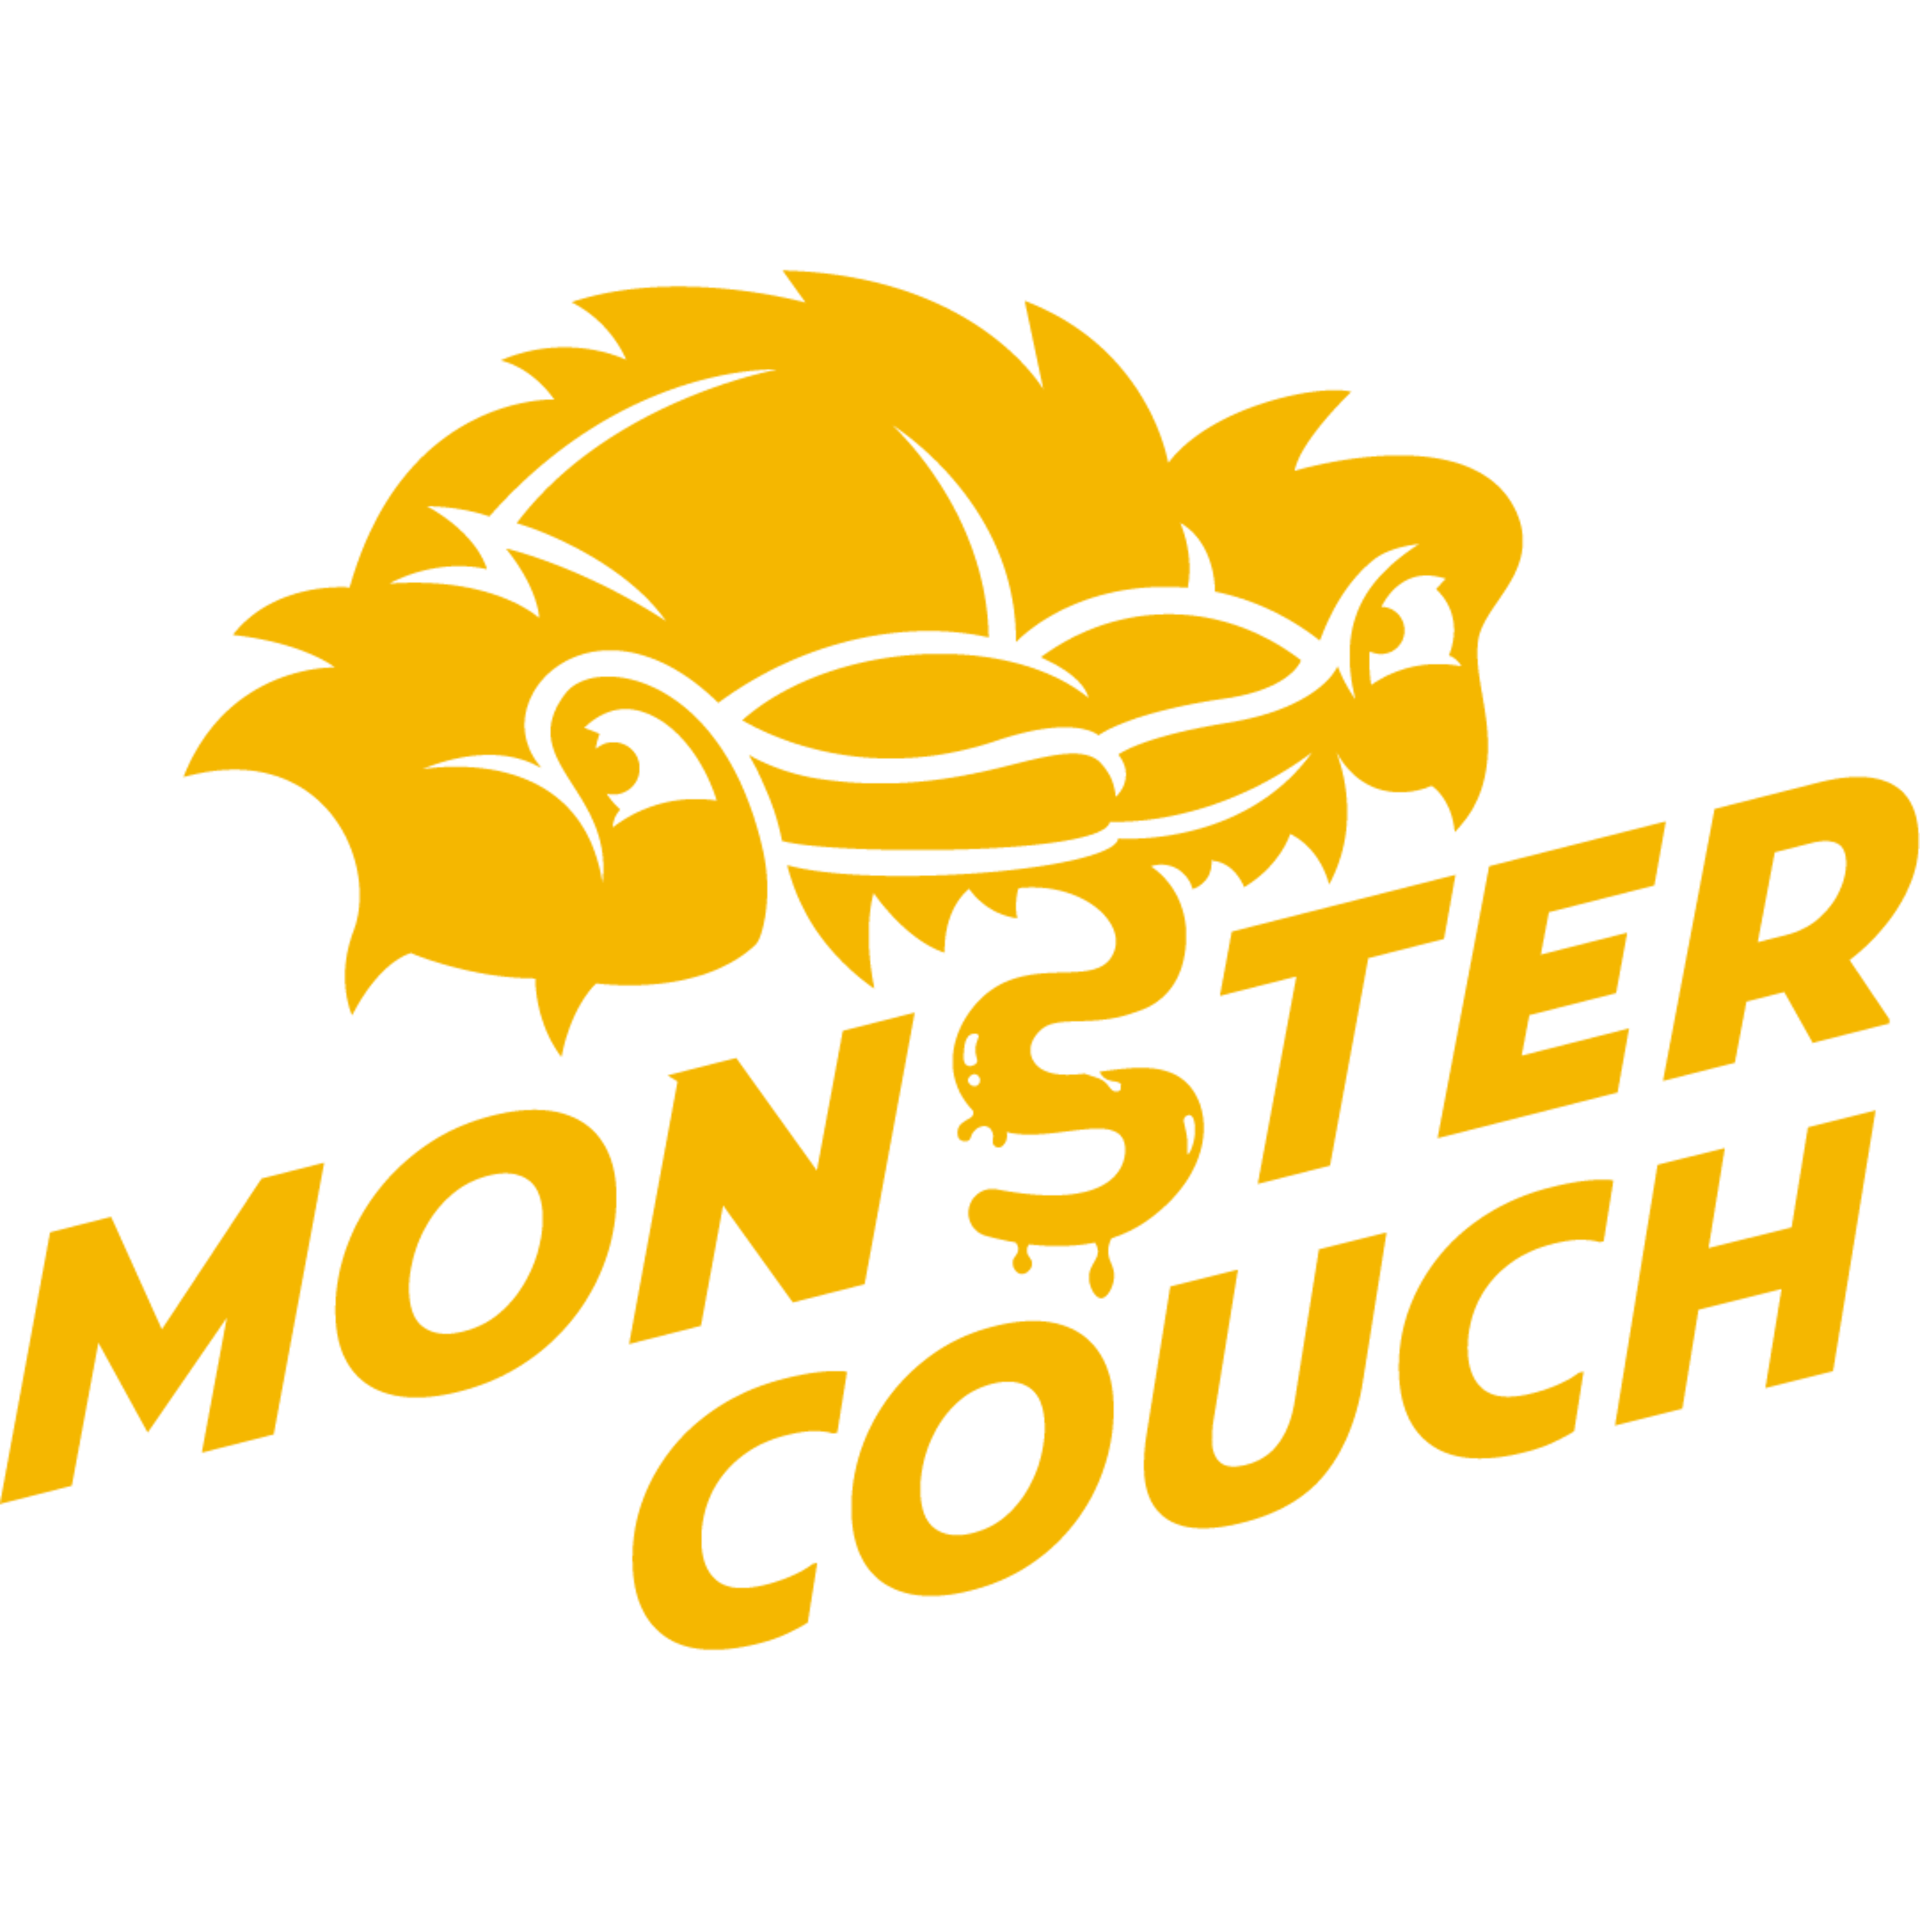 Monster Couch}'s logo